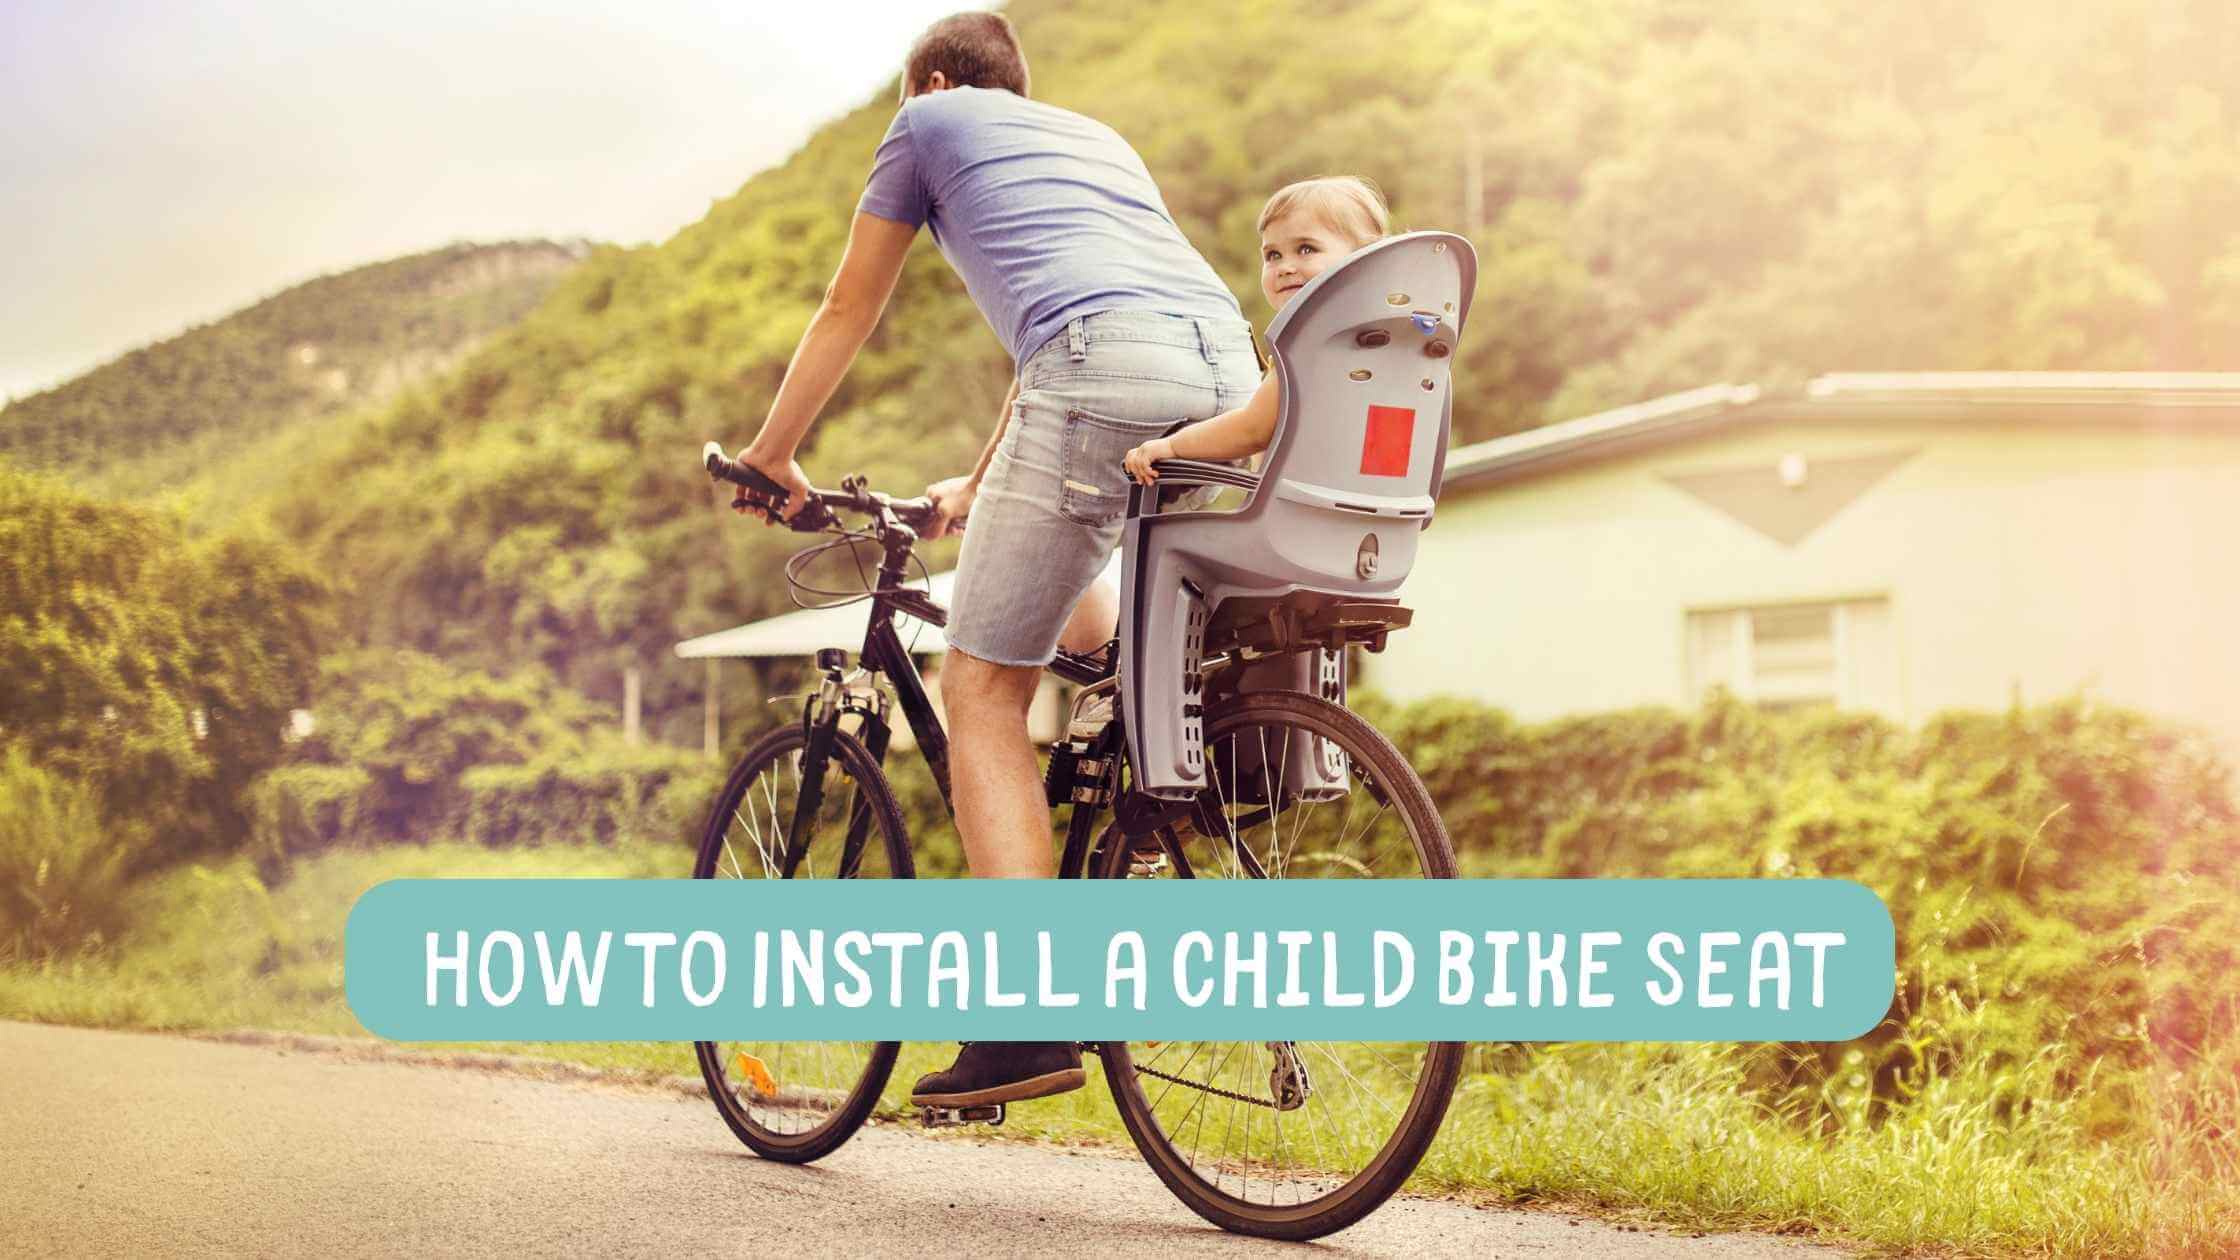 How to Install a Child Bike Seat